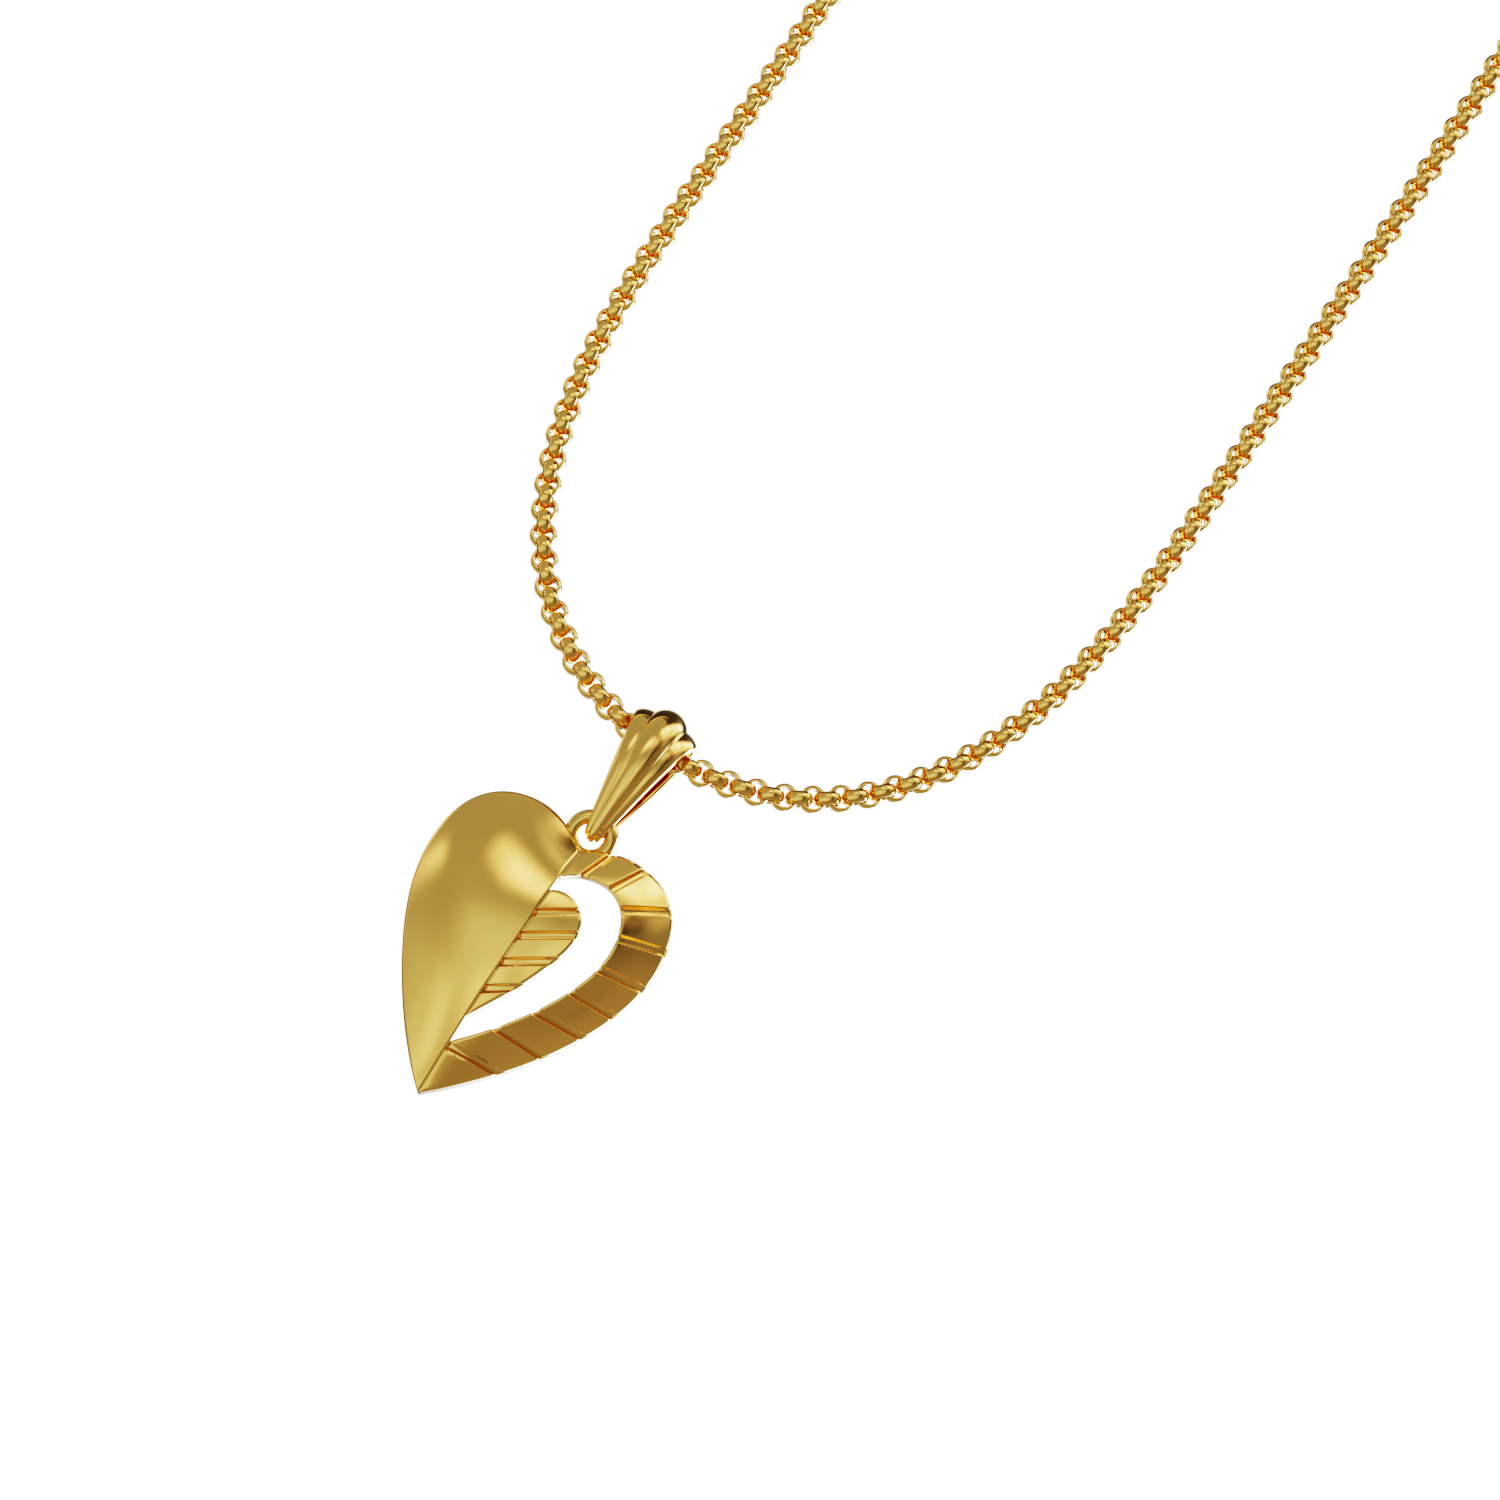 Gold Heart PNG HD Image